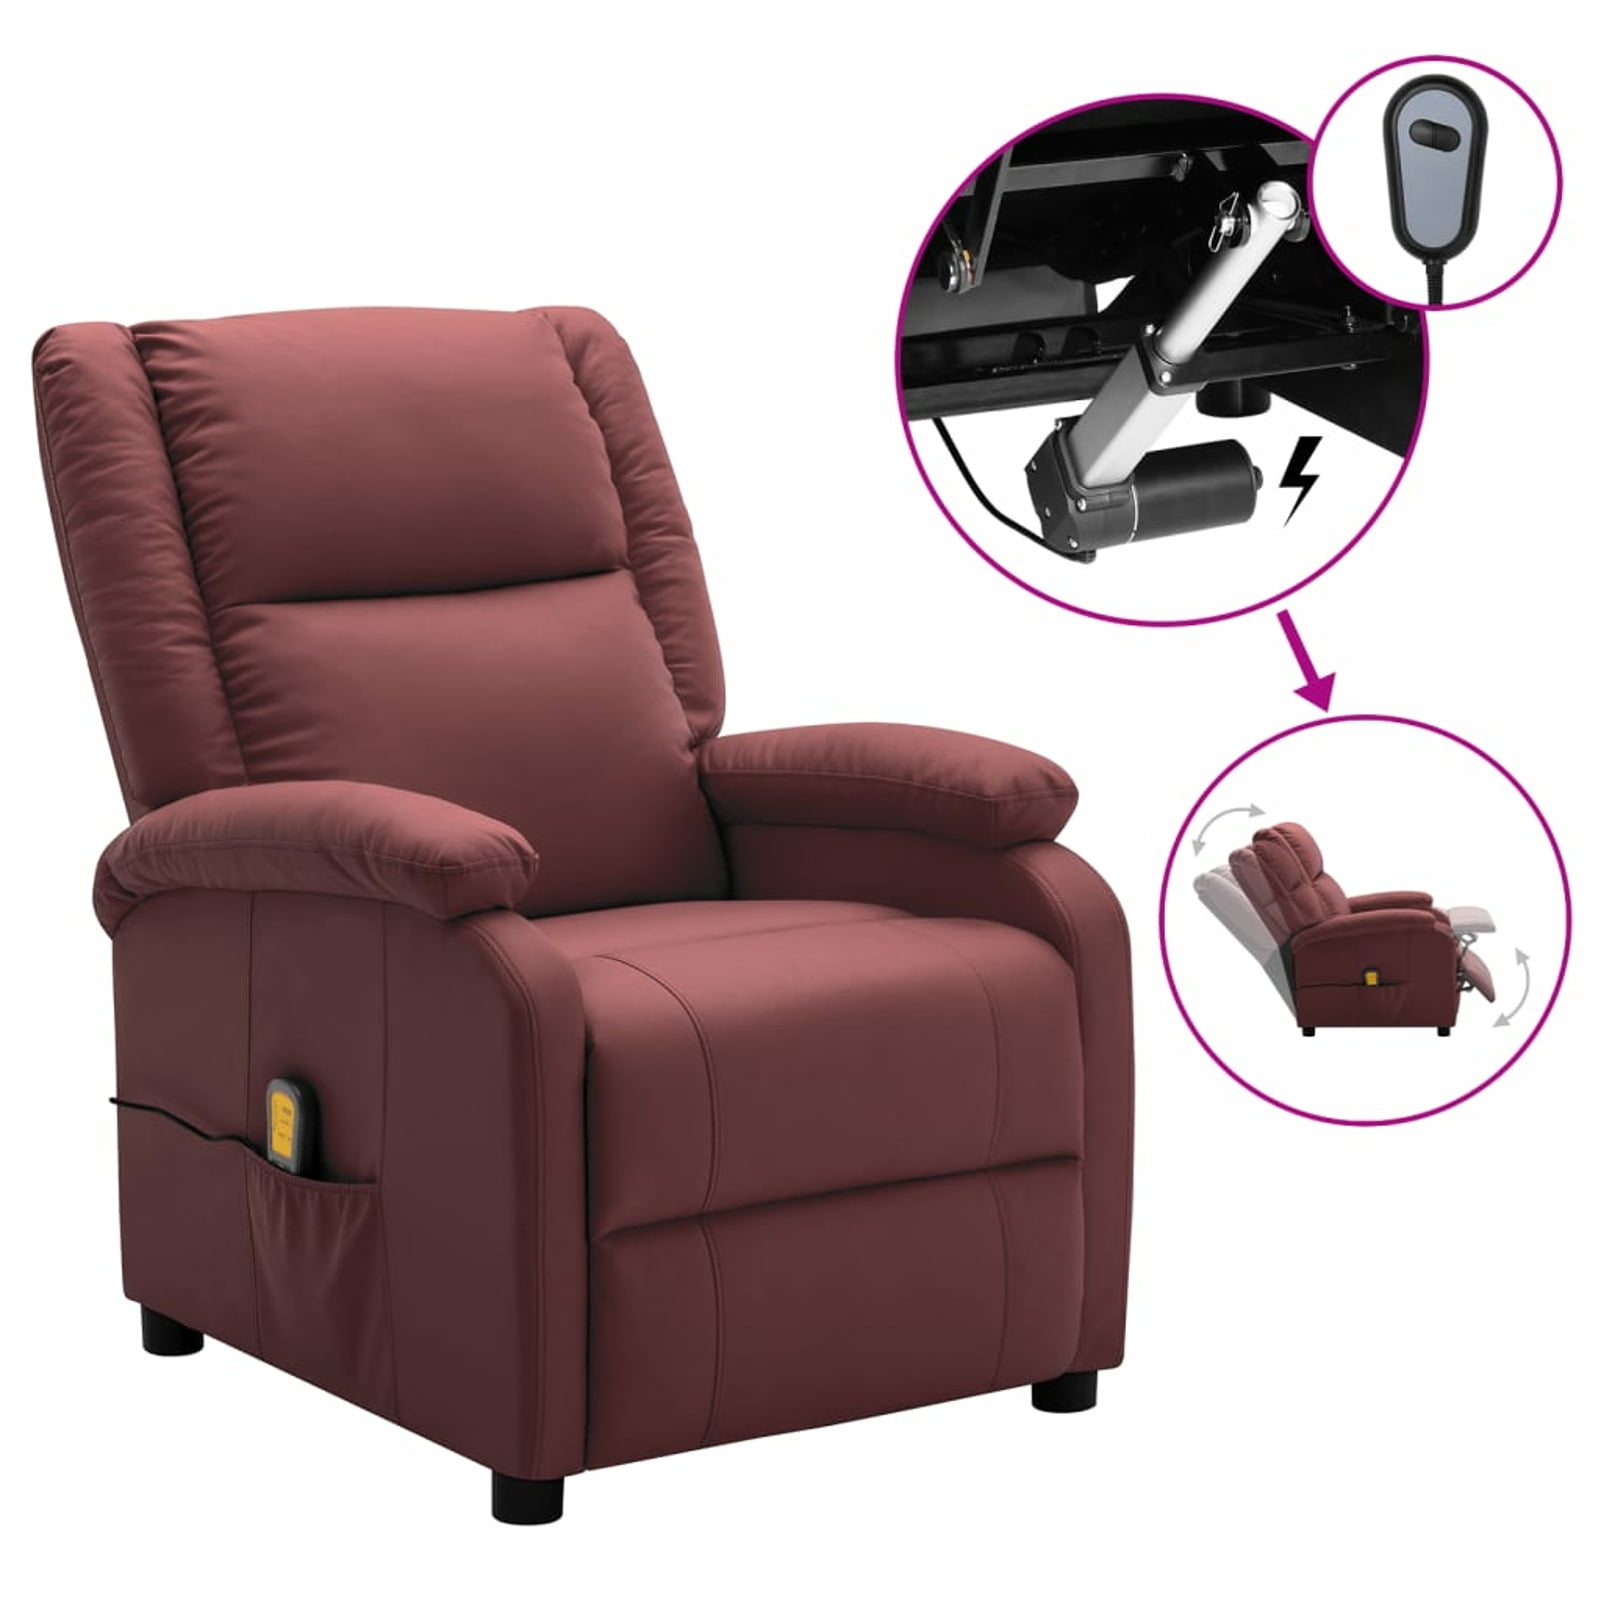 Details about   Massage Gaming Recliner Chair PU Leather Theater Seating Sofa with Footrest 